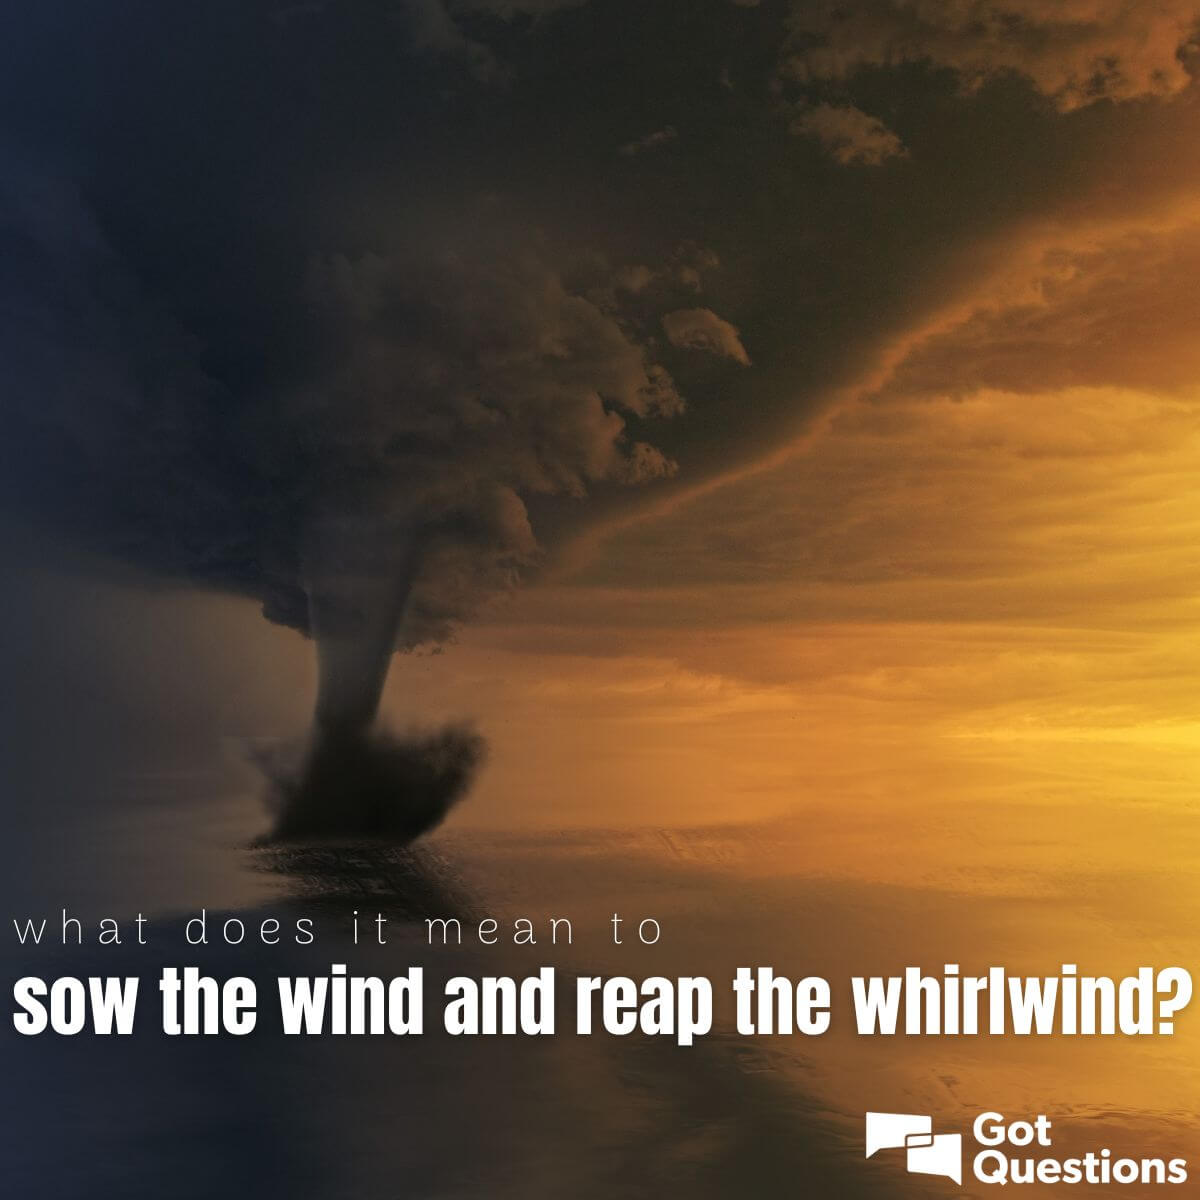 What does it mean to sow the wind and reap the whirlwind (Hosea 8:7